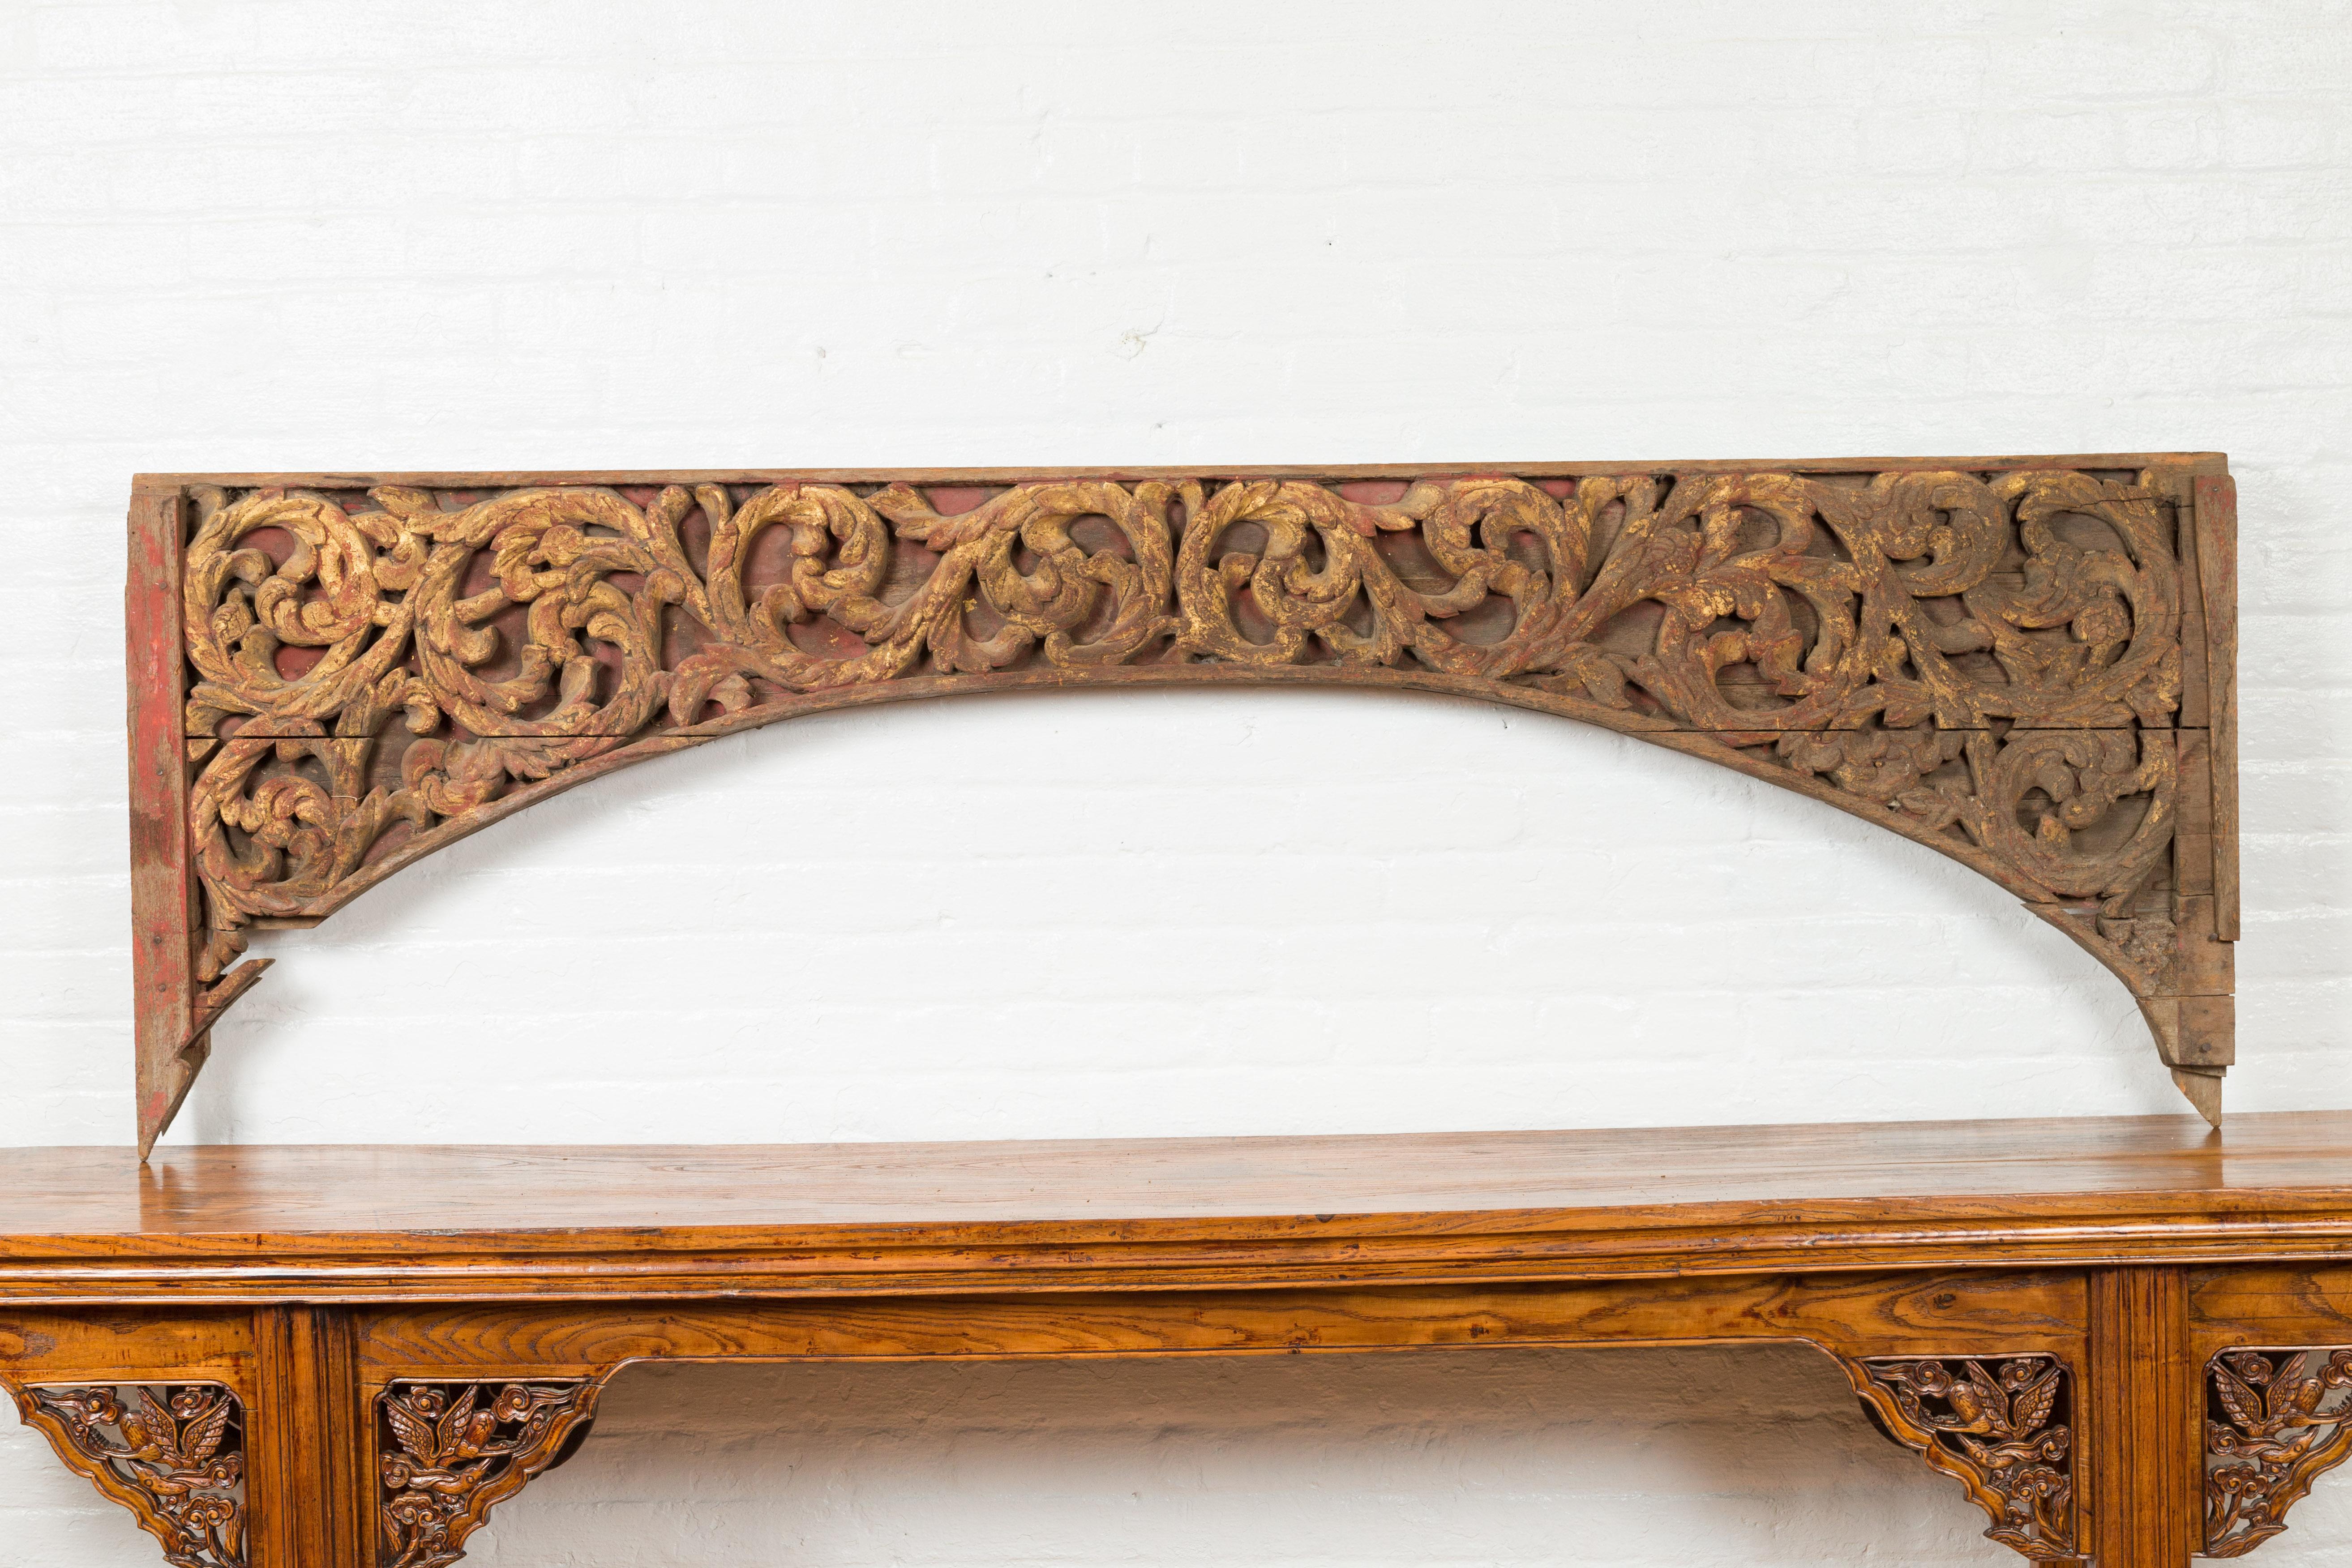 Antique Indonesian Carved and Painted Architectural Panel with Rinceaux Frieze In Good Condition For Sale In Yonkers, NY